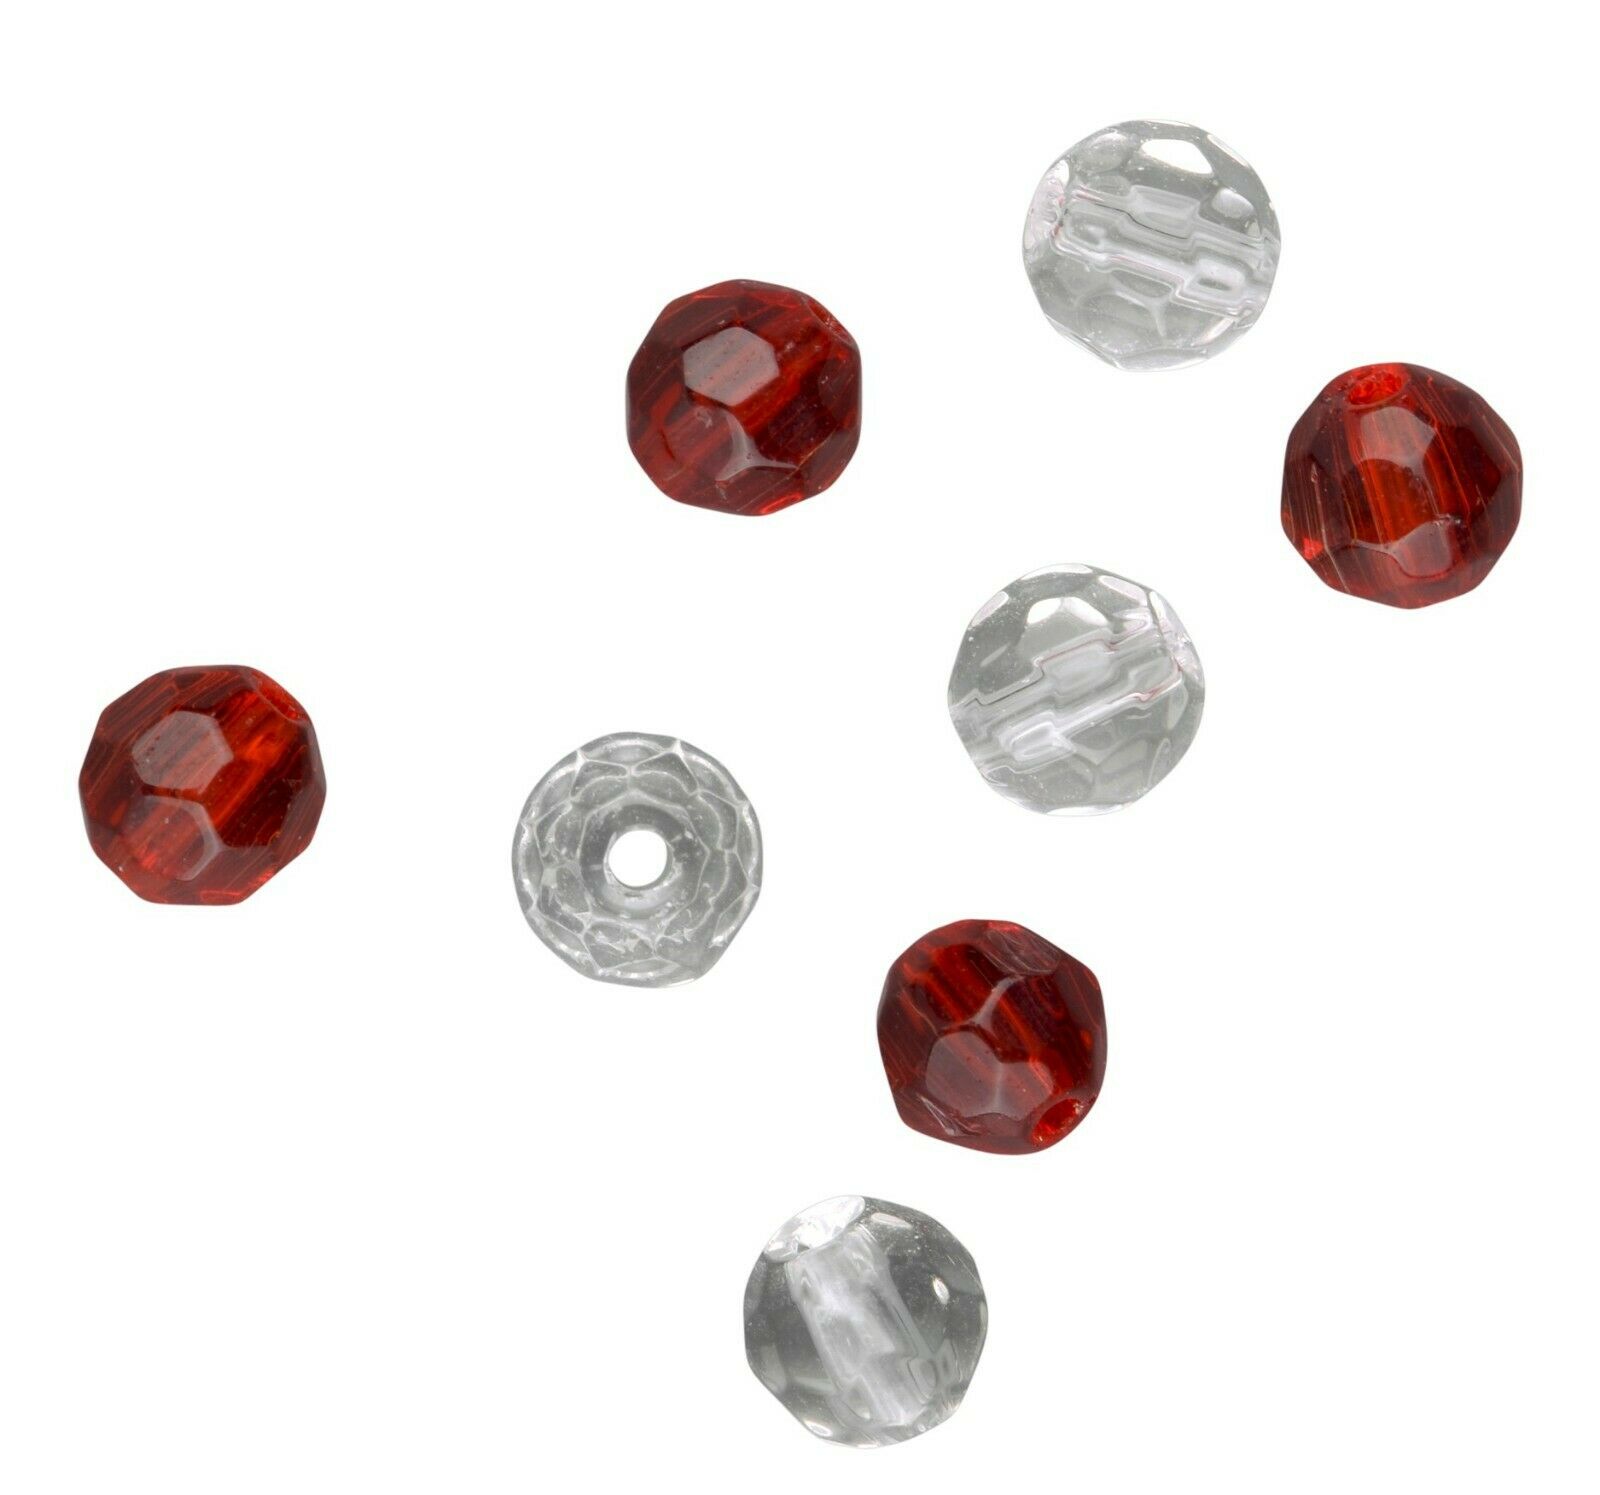 K.P Glass Bead Glass Beads 6mm 10 Piece Faceted Texas Carolina Rig 